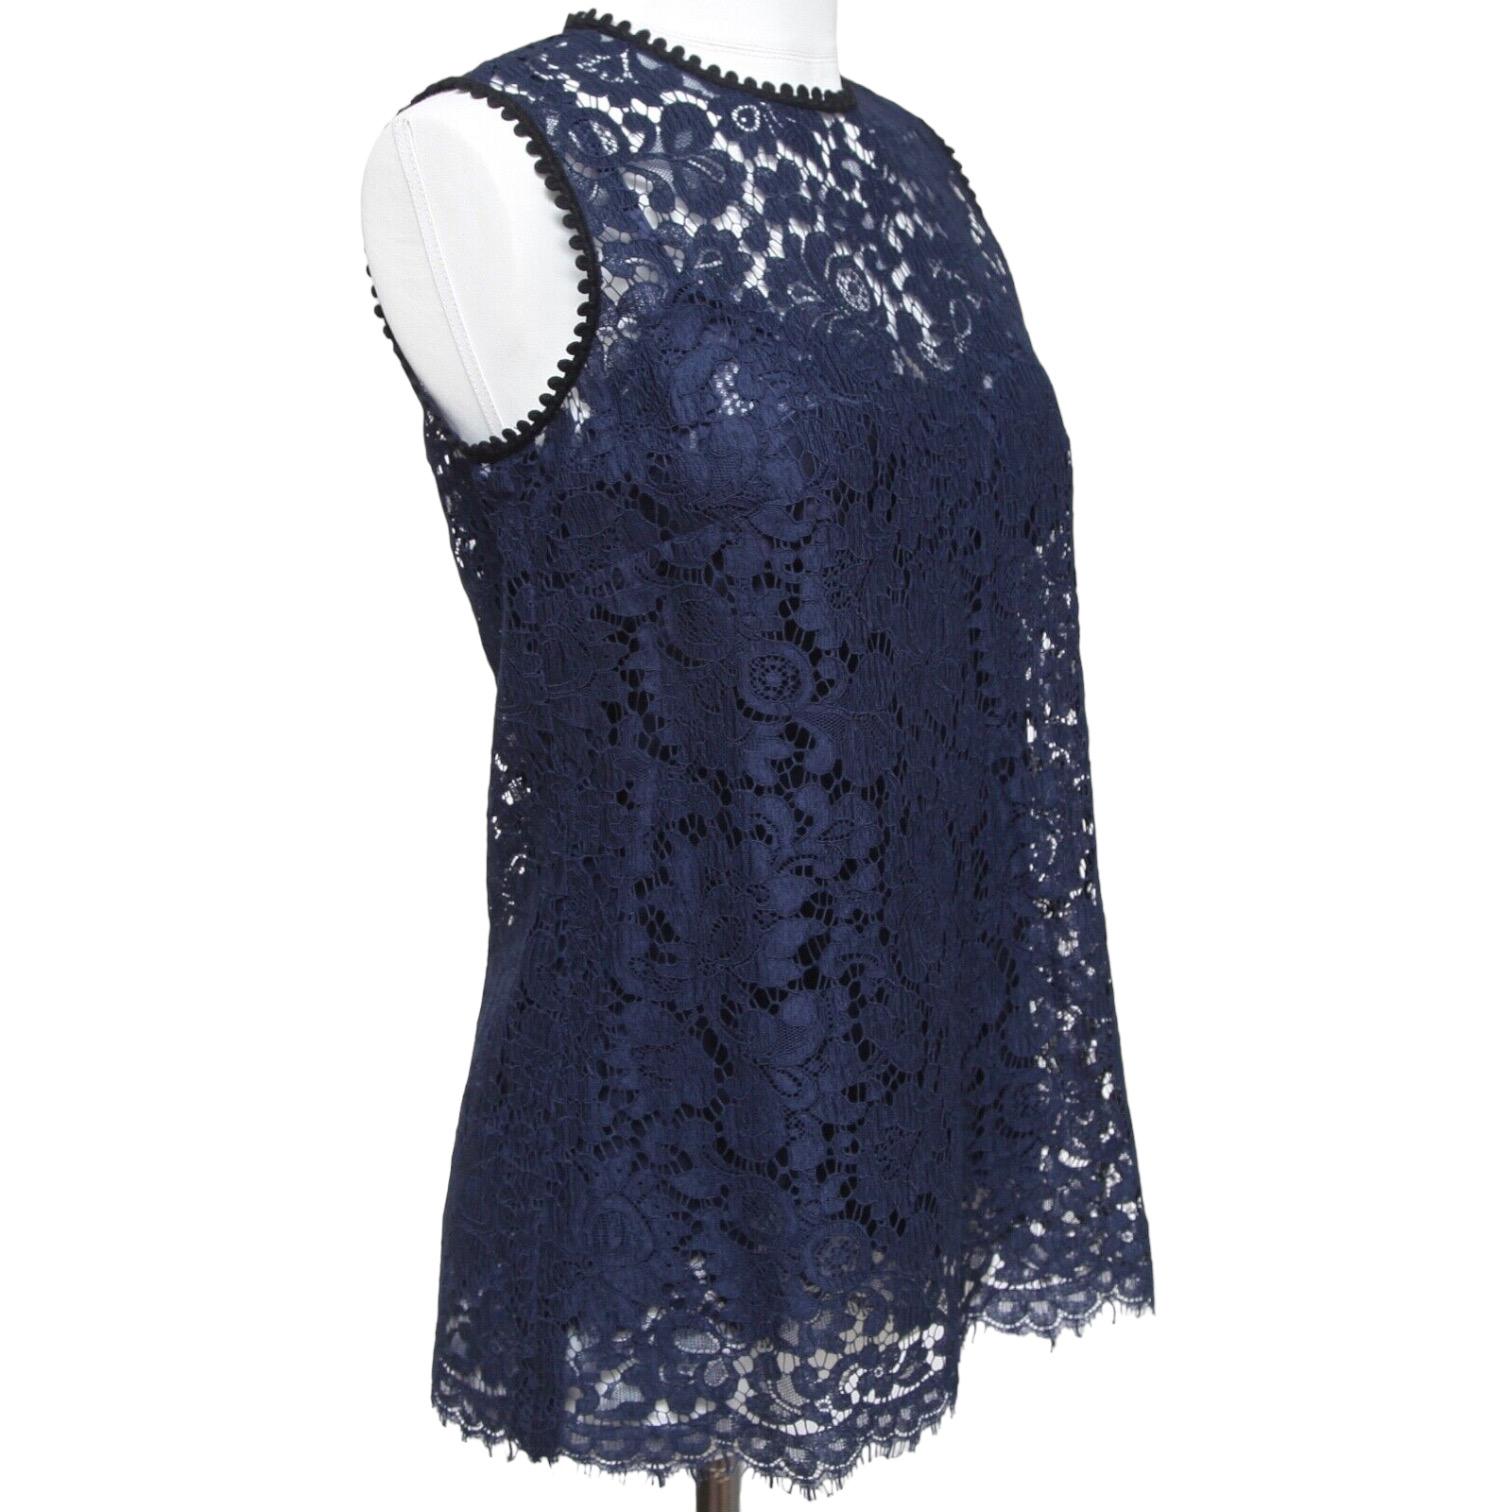 DOLCE & GABBANA Blouse Shirt Top Navy Blue Black Sleeveless Lace Sz 40 Ret $1495 In New Condition For Sale In Hollywood, FL